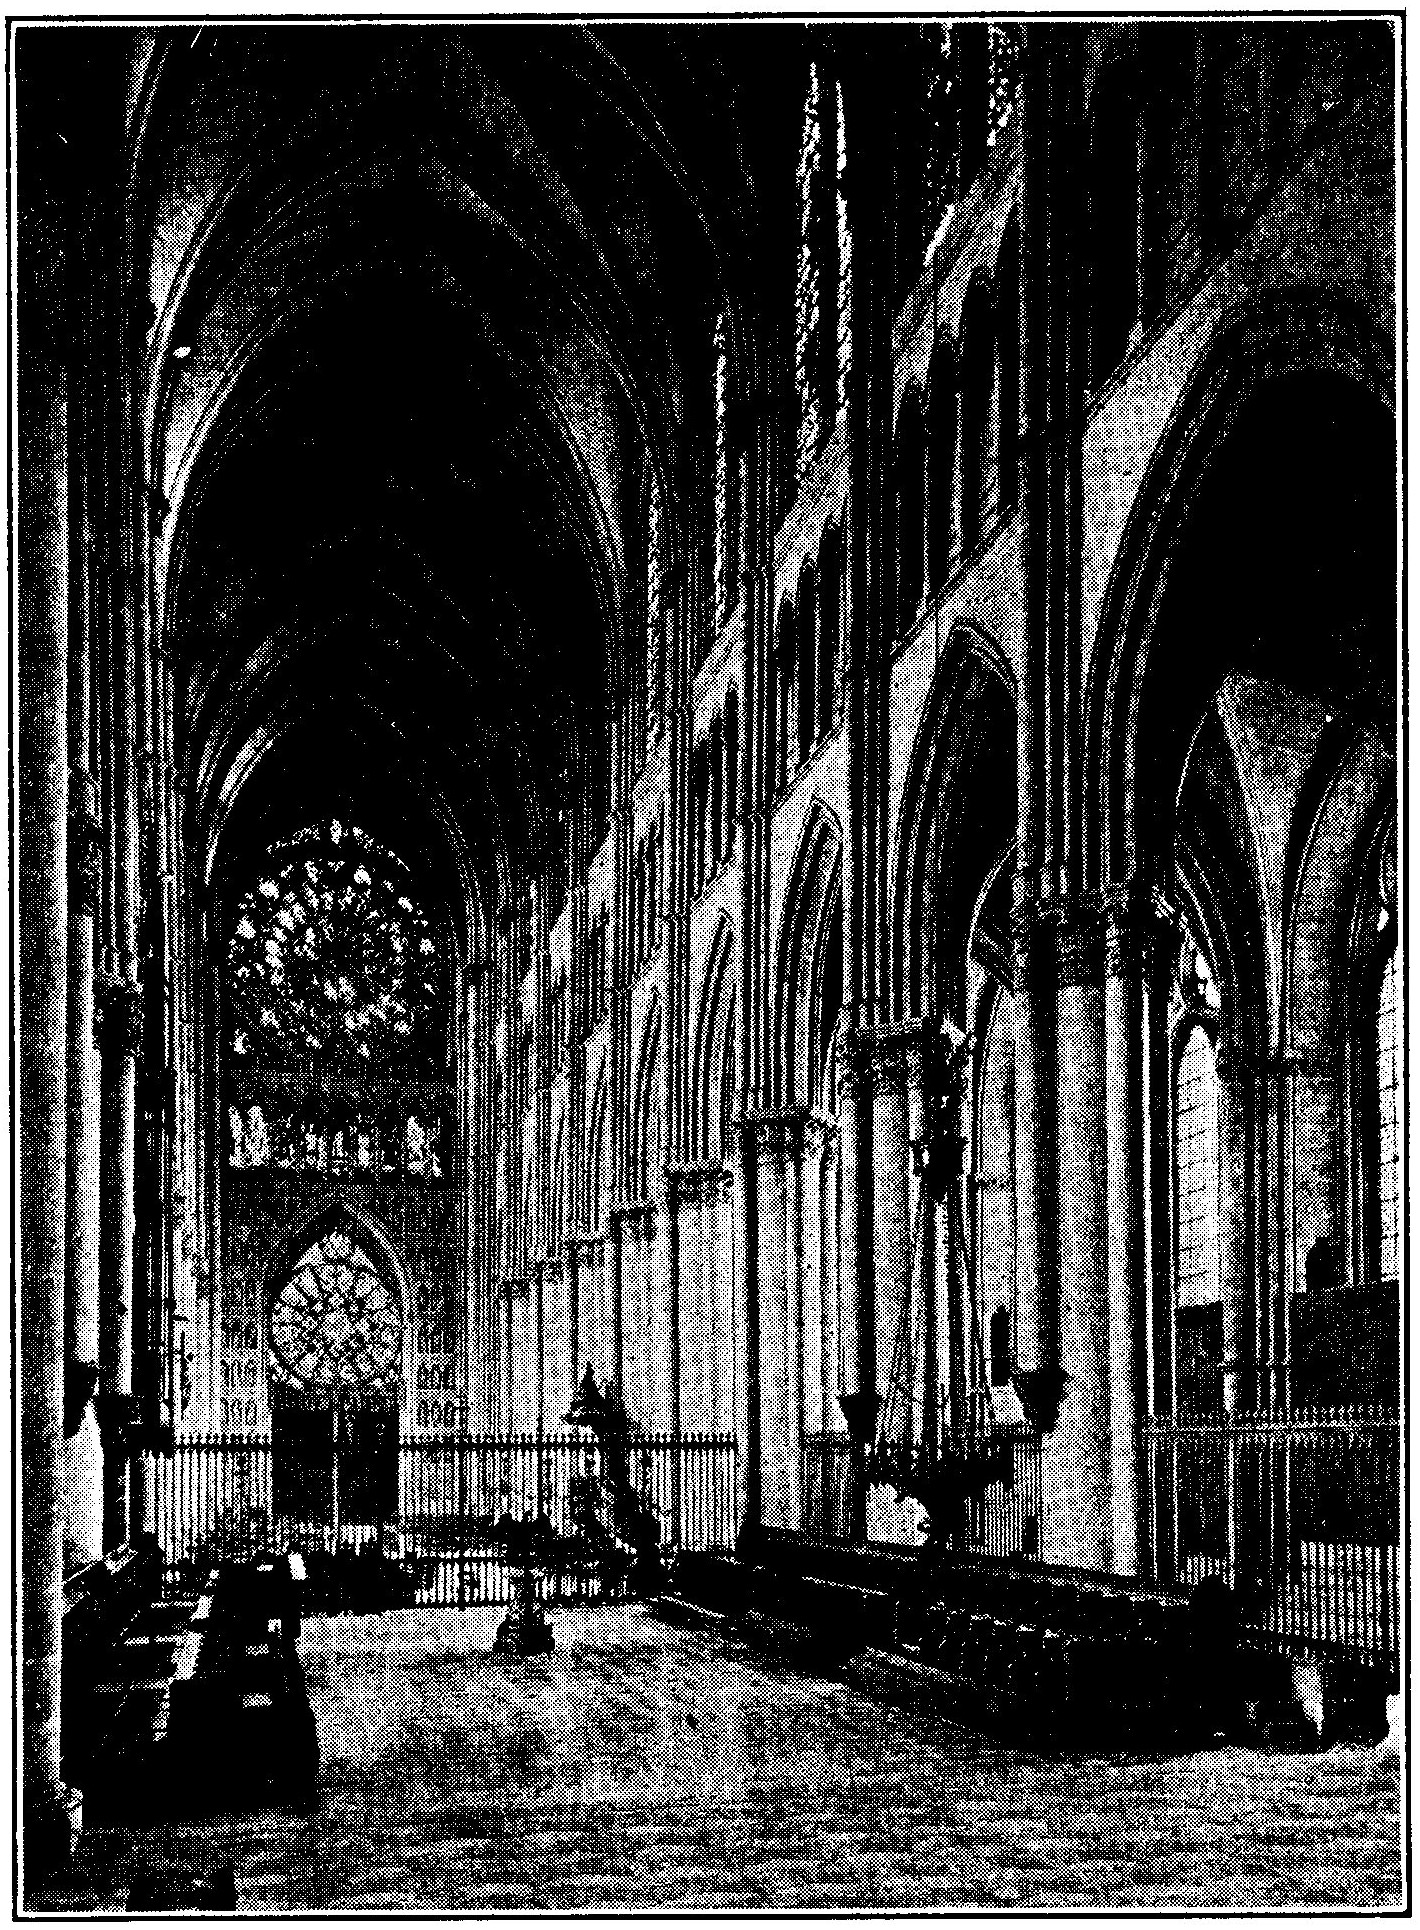 INTERIOR OF CATHEDRAL OF REIMS, FRANCE  The style is Gothic. Note the difference in height between the main aisle (nave) and the side aisles, the arrangement of windows, the ribbed ceiling, and the character of the pillars. This picture was taken from the sanctuary.